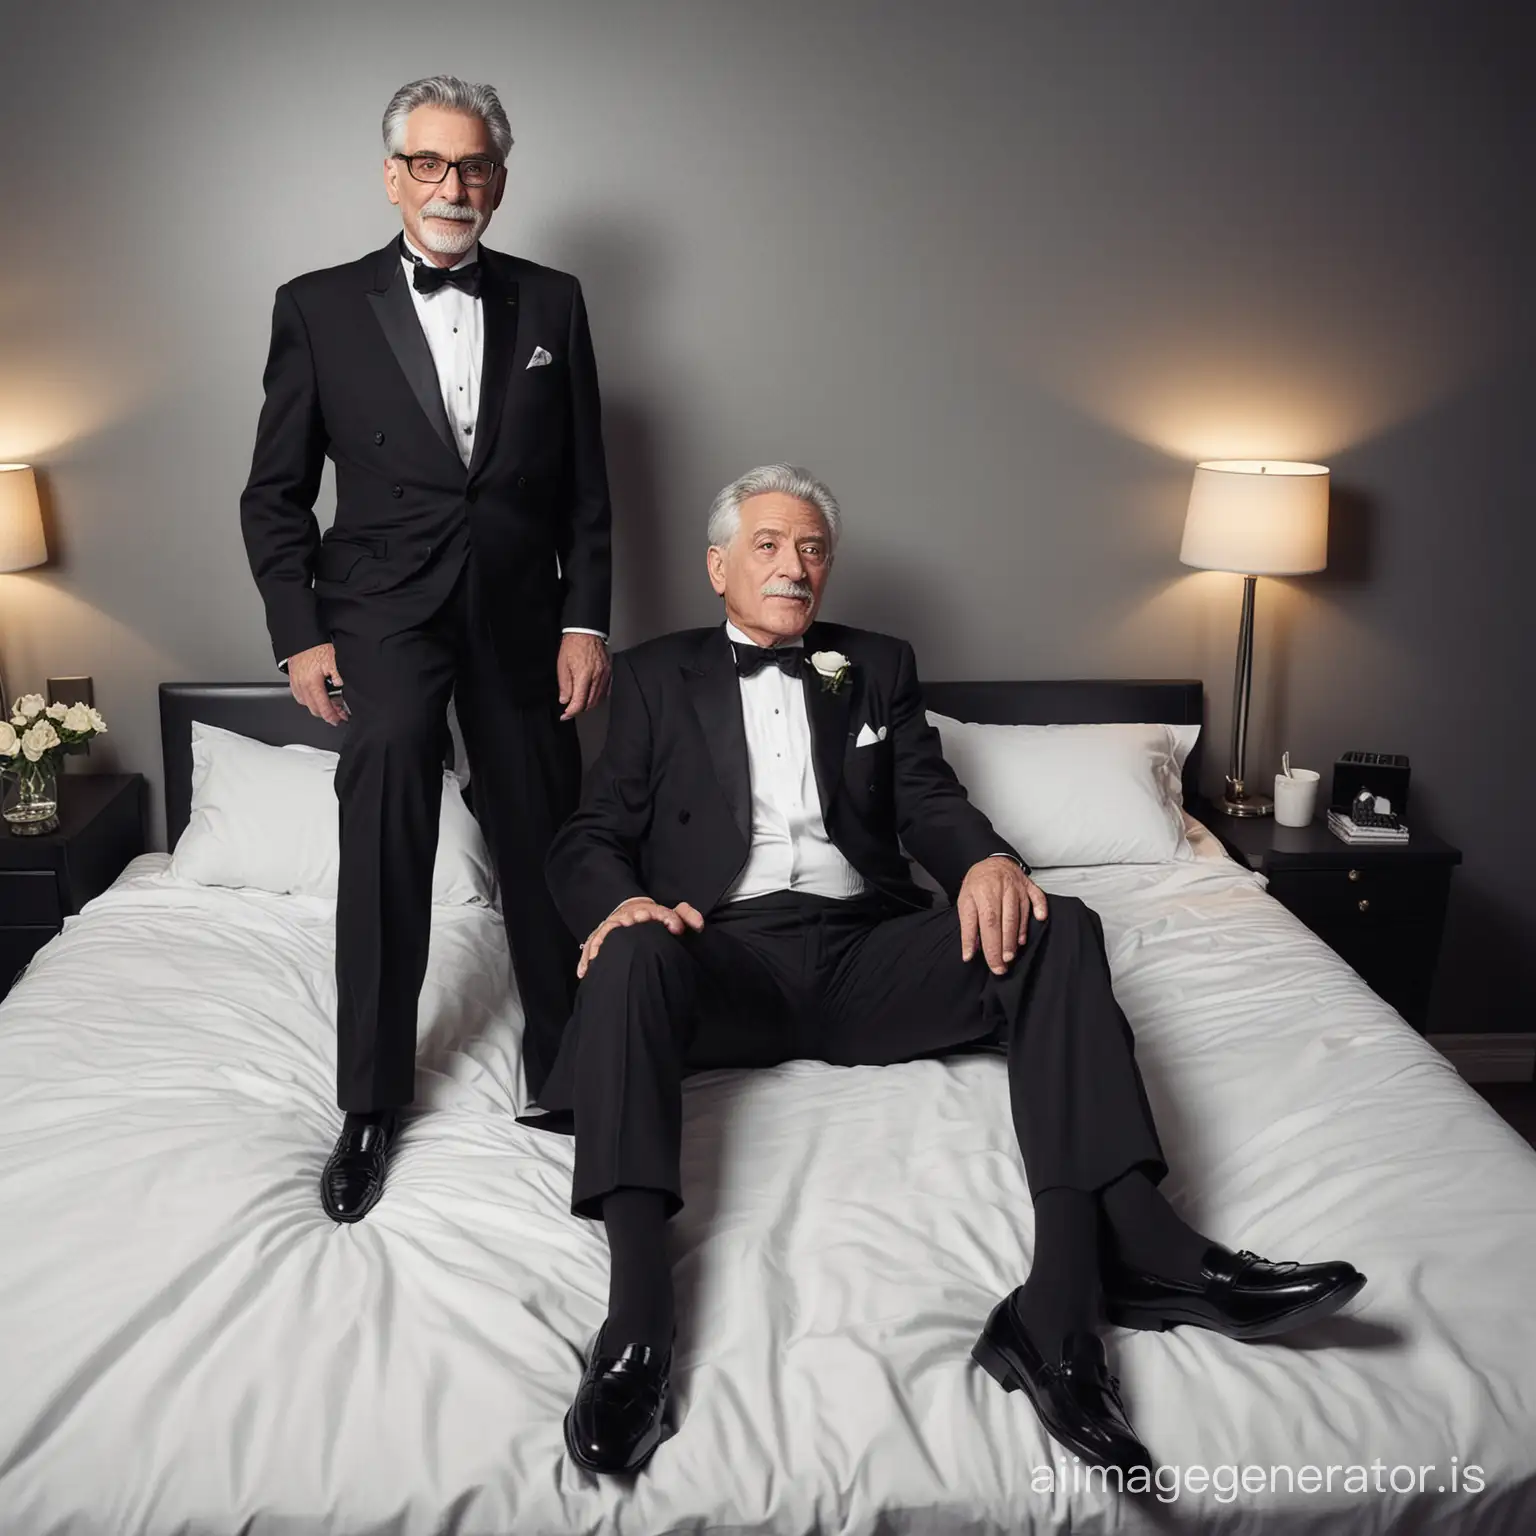 Two men,both 80 years old gentlemen, shot height, both wearing tuxedo, black loafers, grey hair,  embarrassing face, laying on the bed, full body shot, full body shot, office background, dramatic lighting
